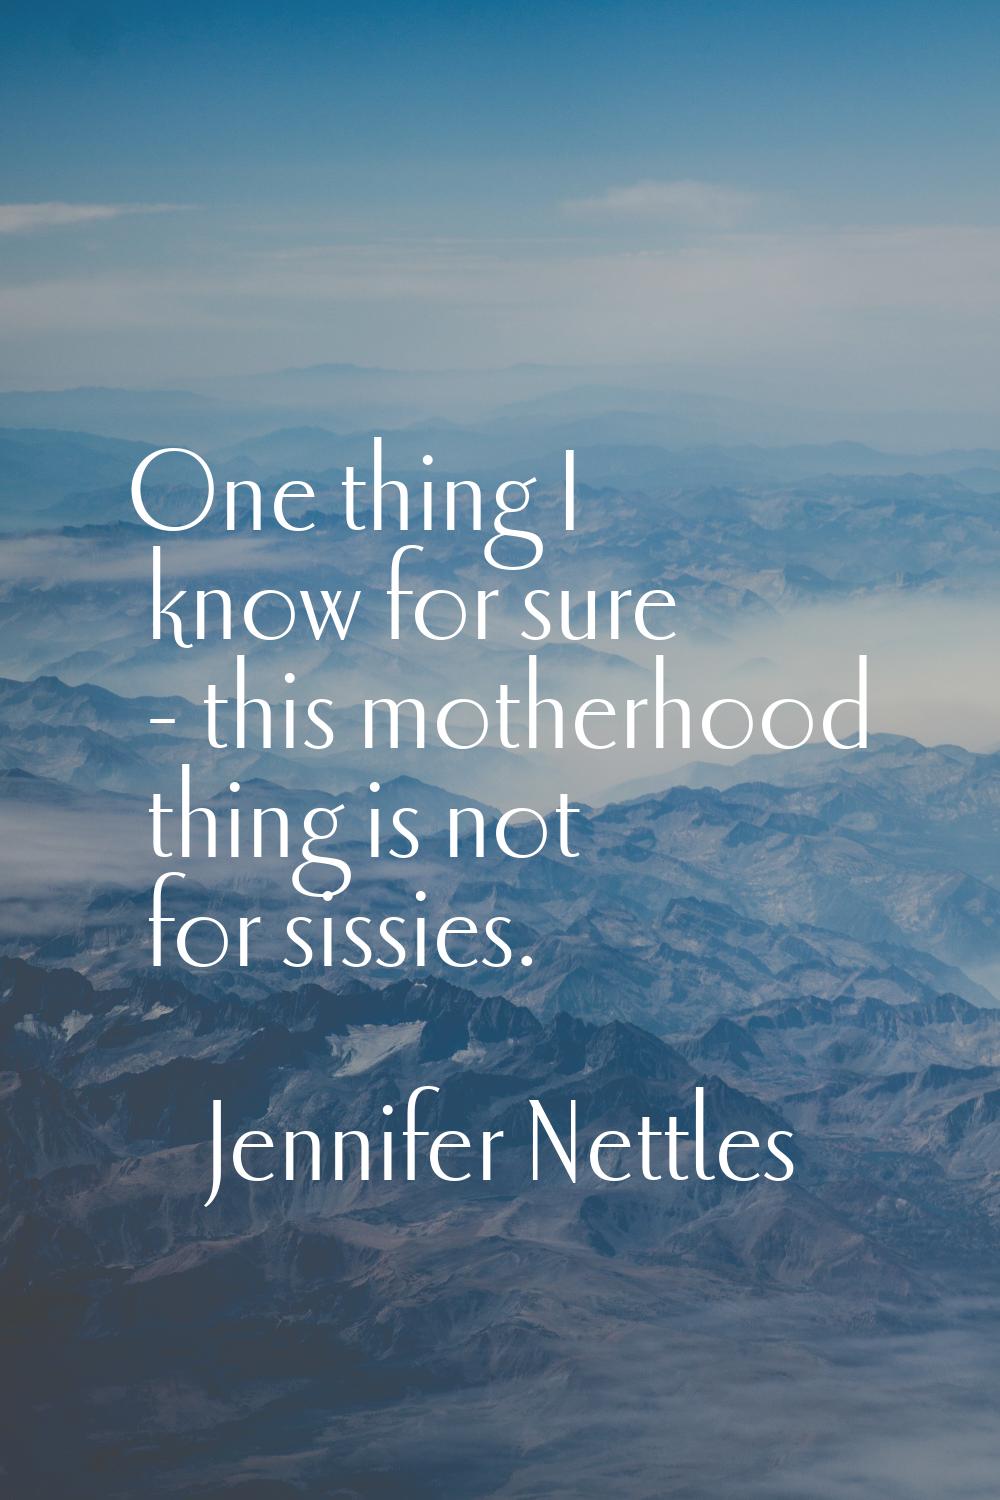 One thing I know for sure - this motherhood thing is not for sissies.